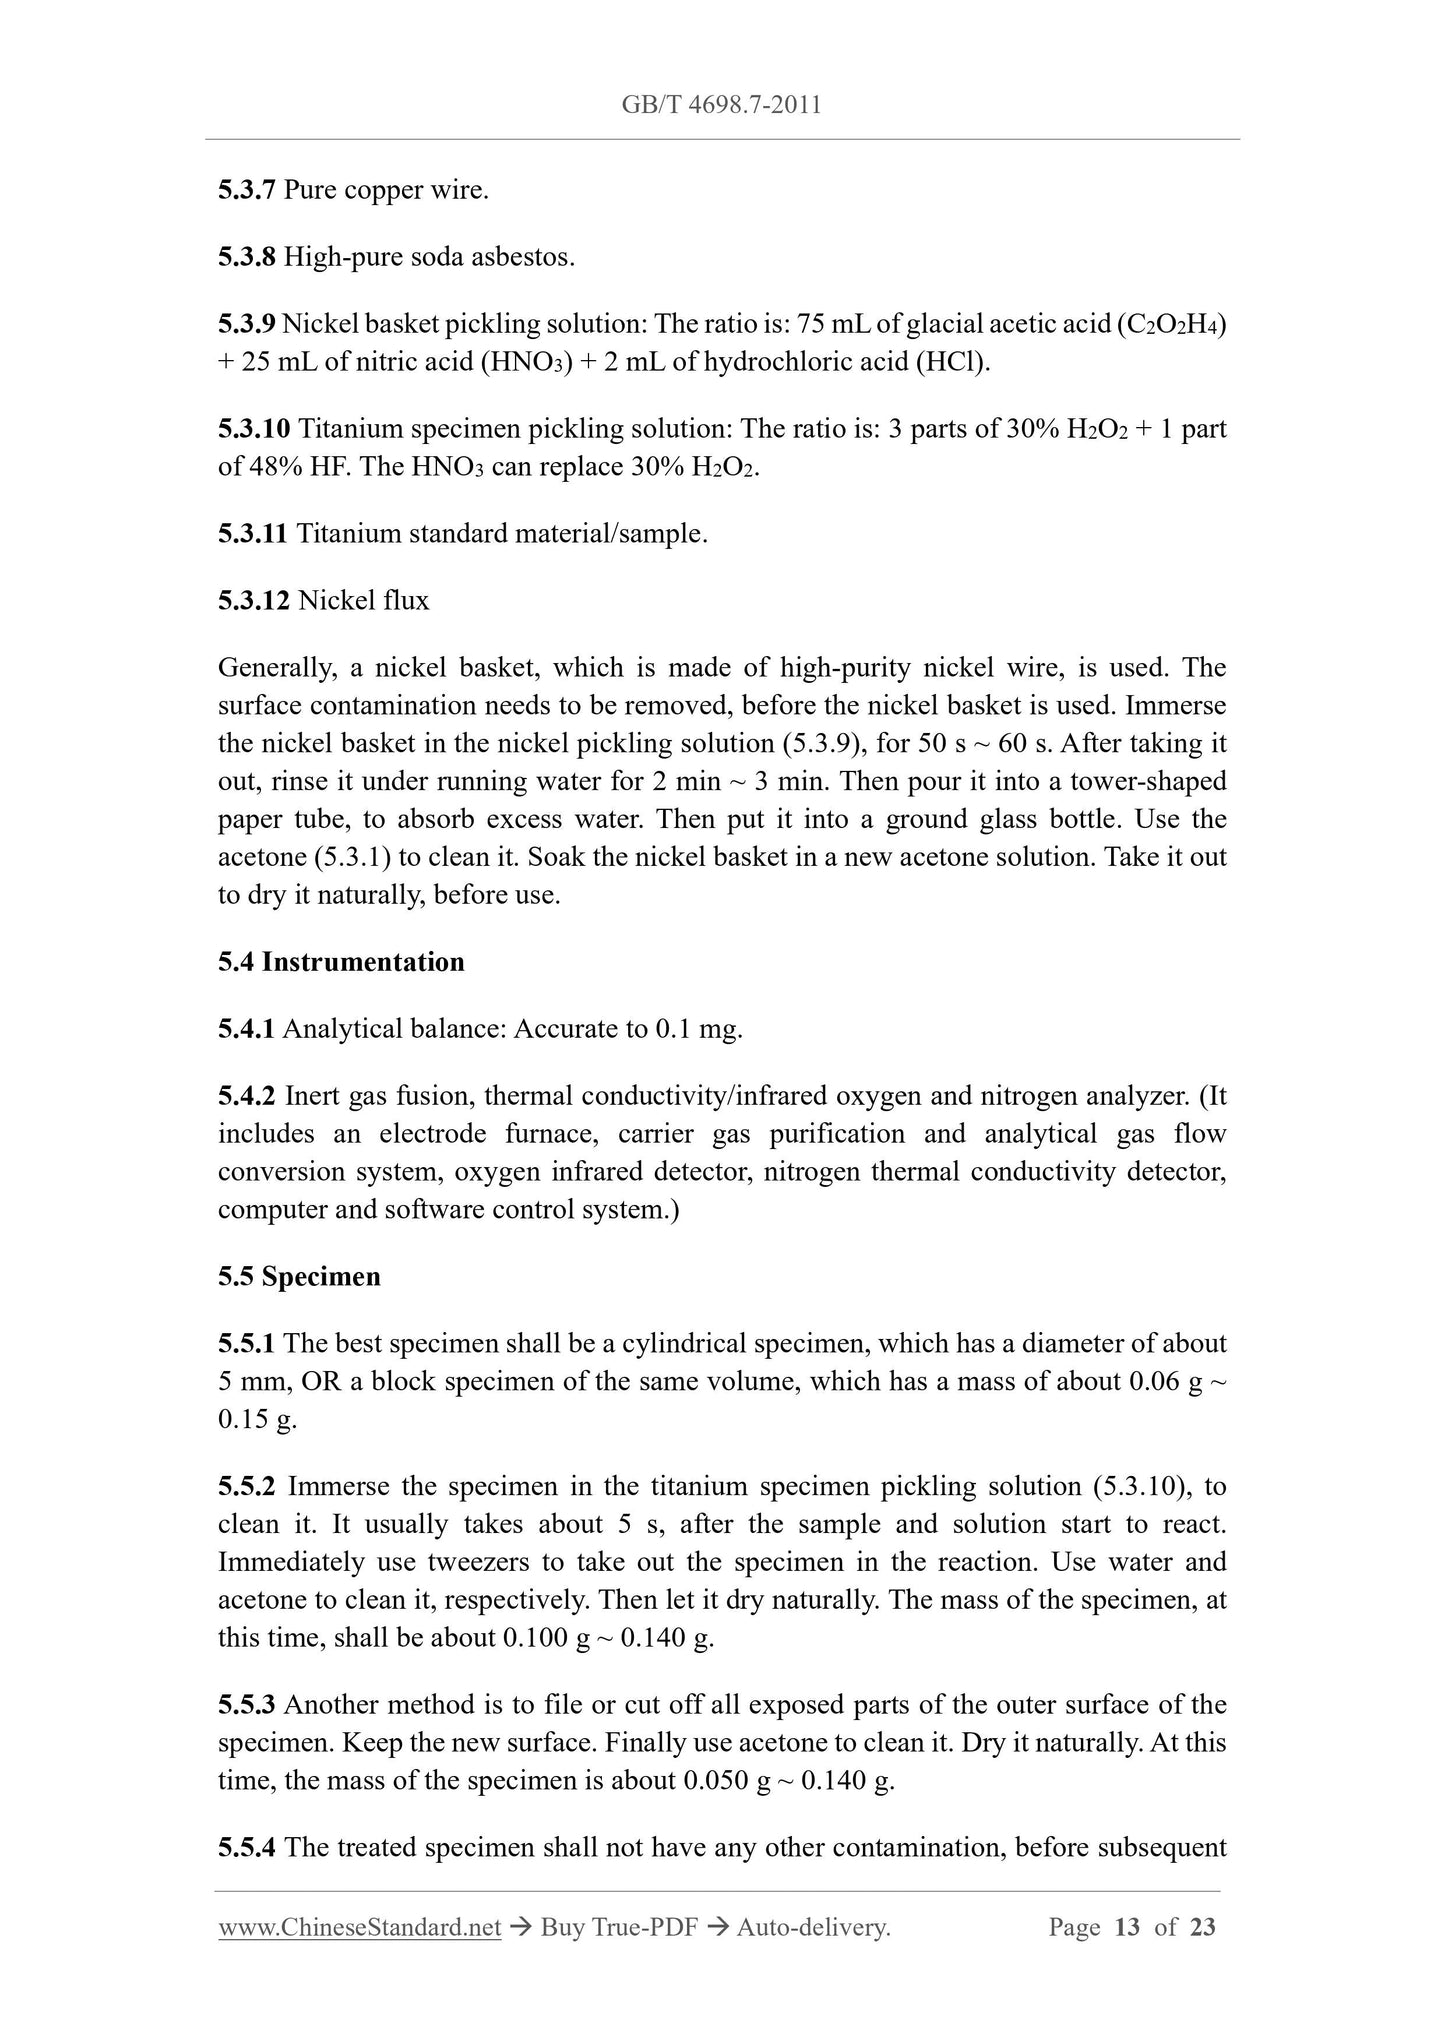 GB/T 4698.7-2011 Page 7